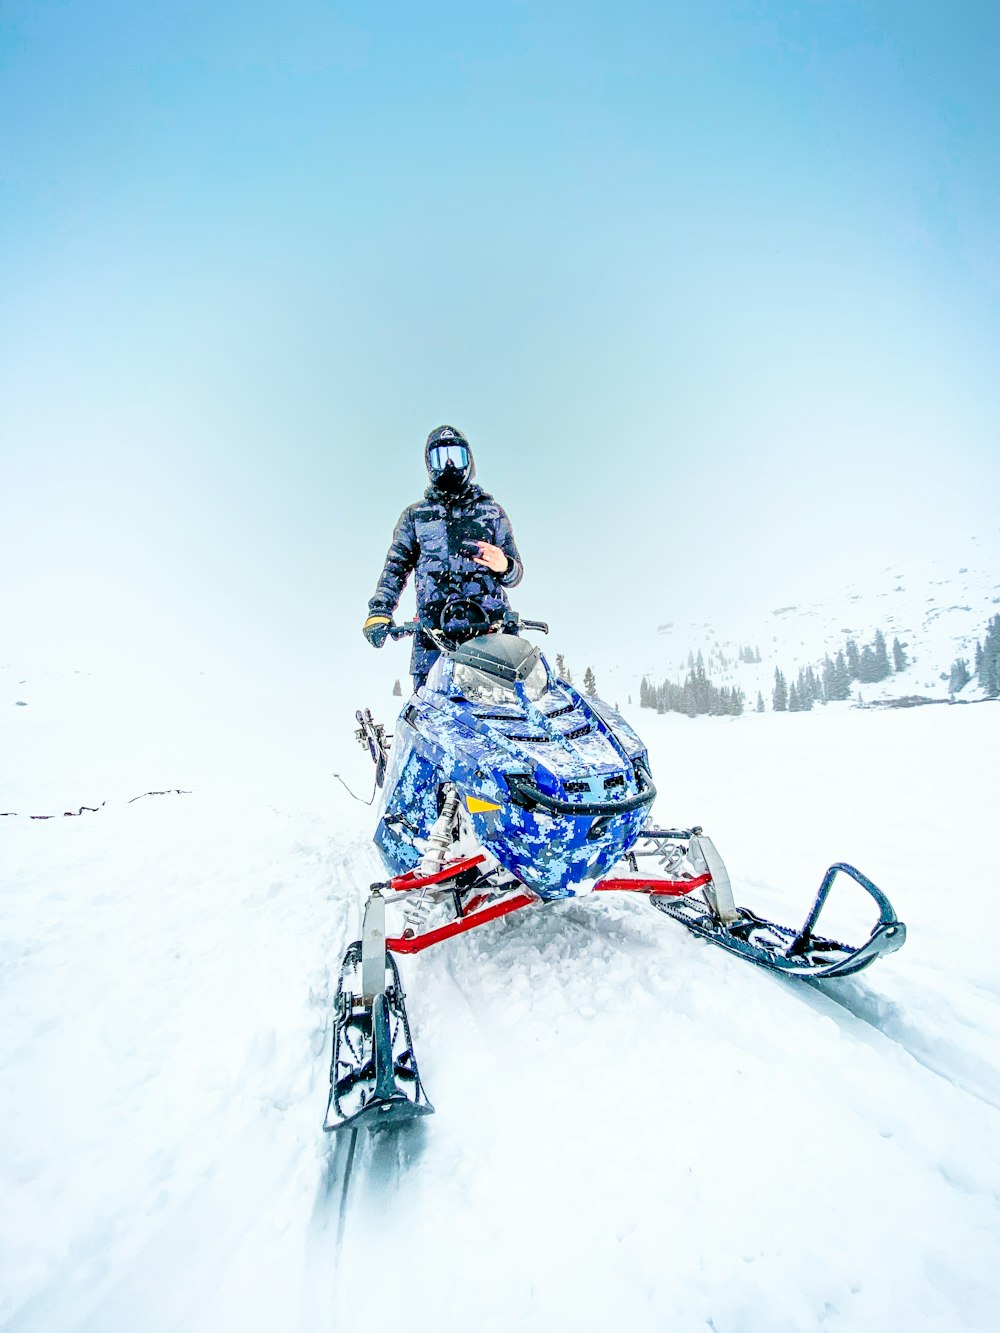 person riding blue snow ski on snow covered ground during daytime